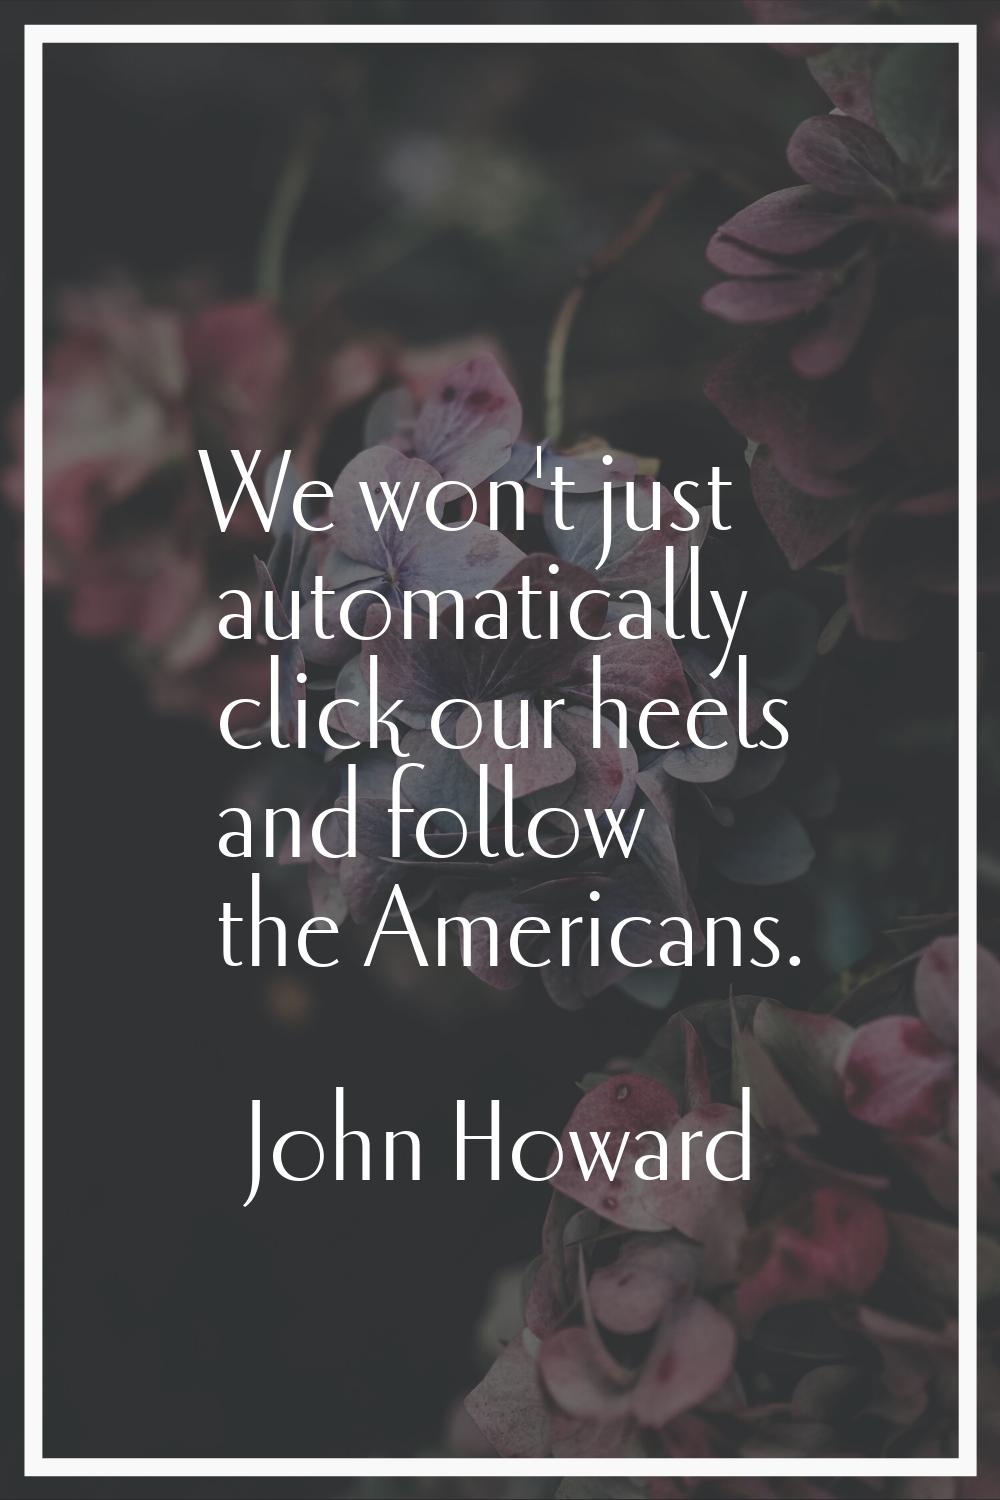 We won't just automatically click our heels and follow the Americans.